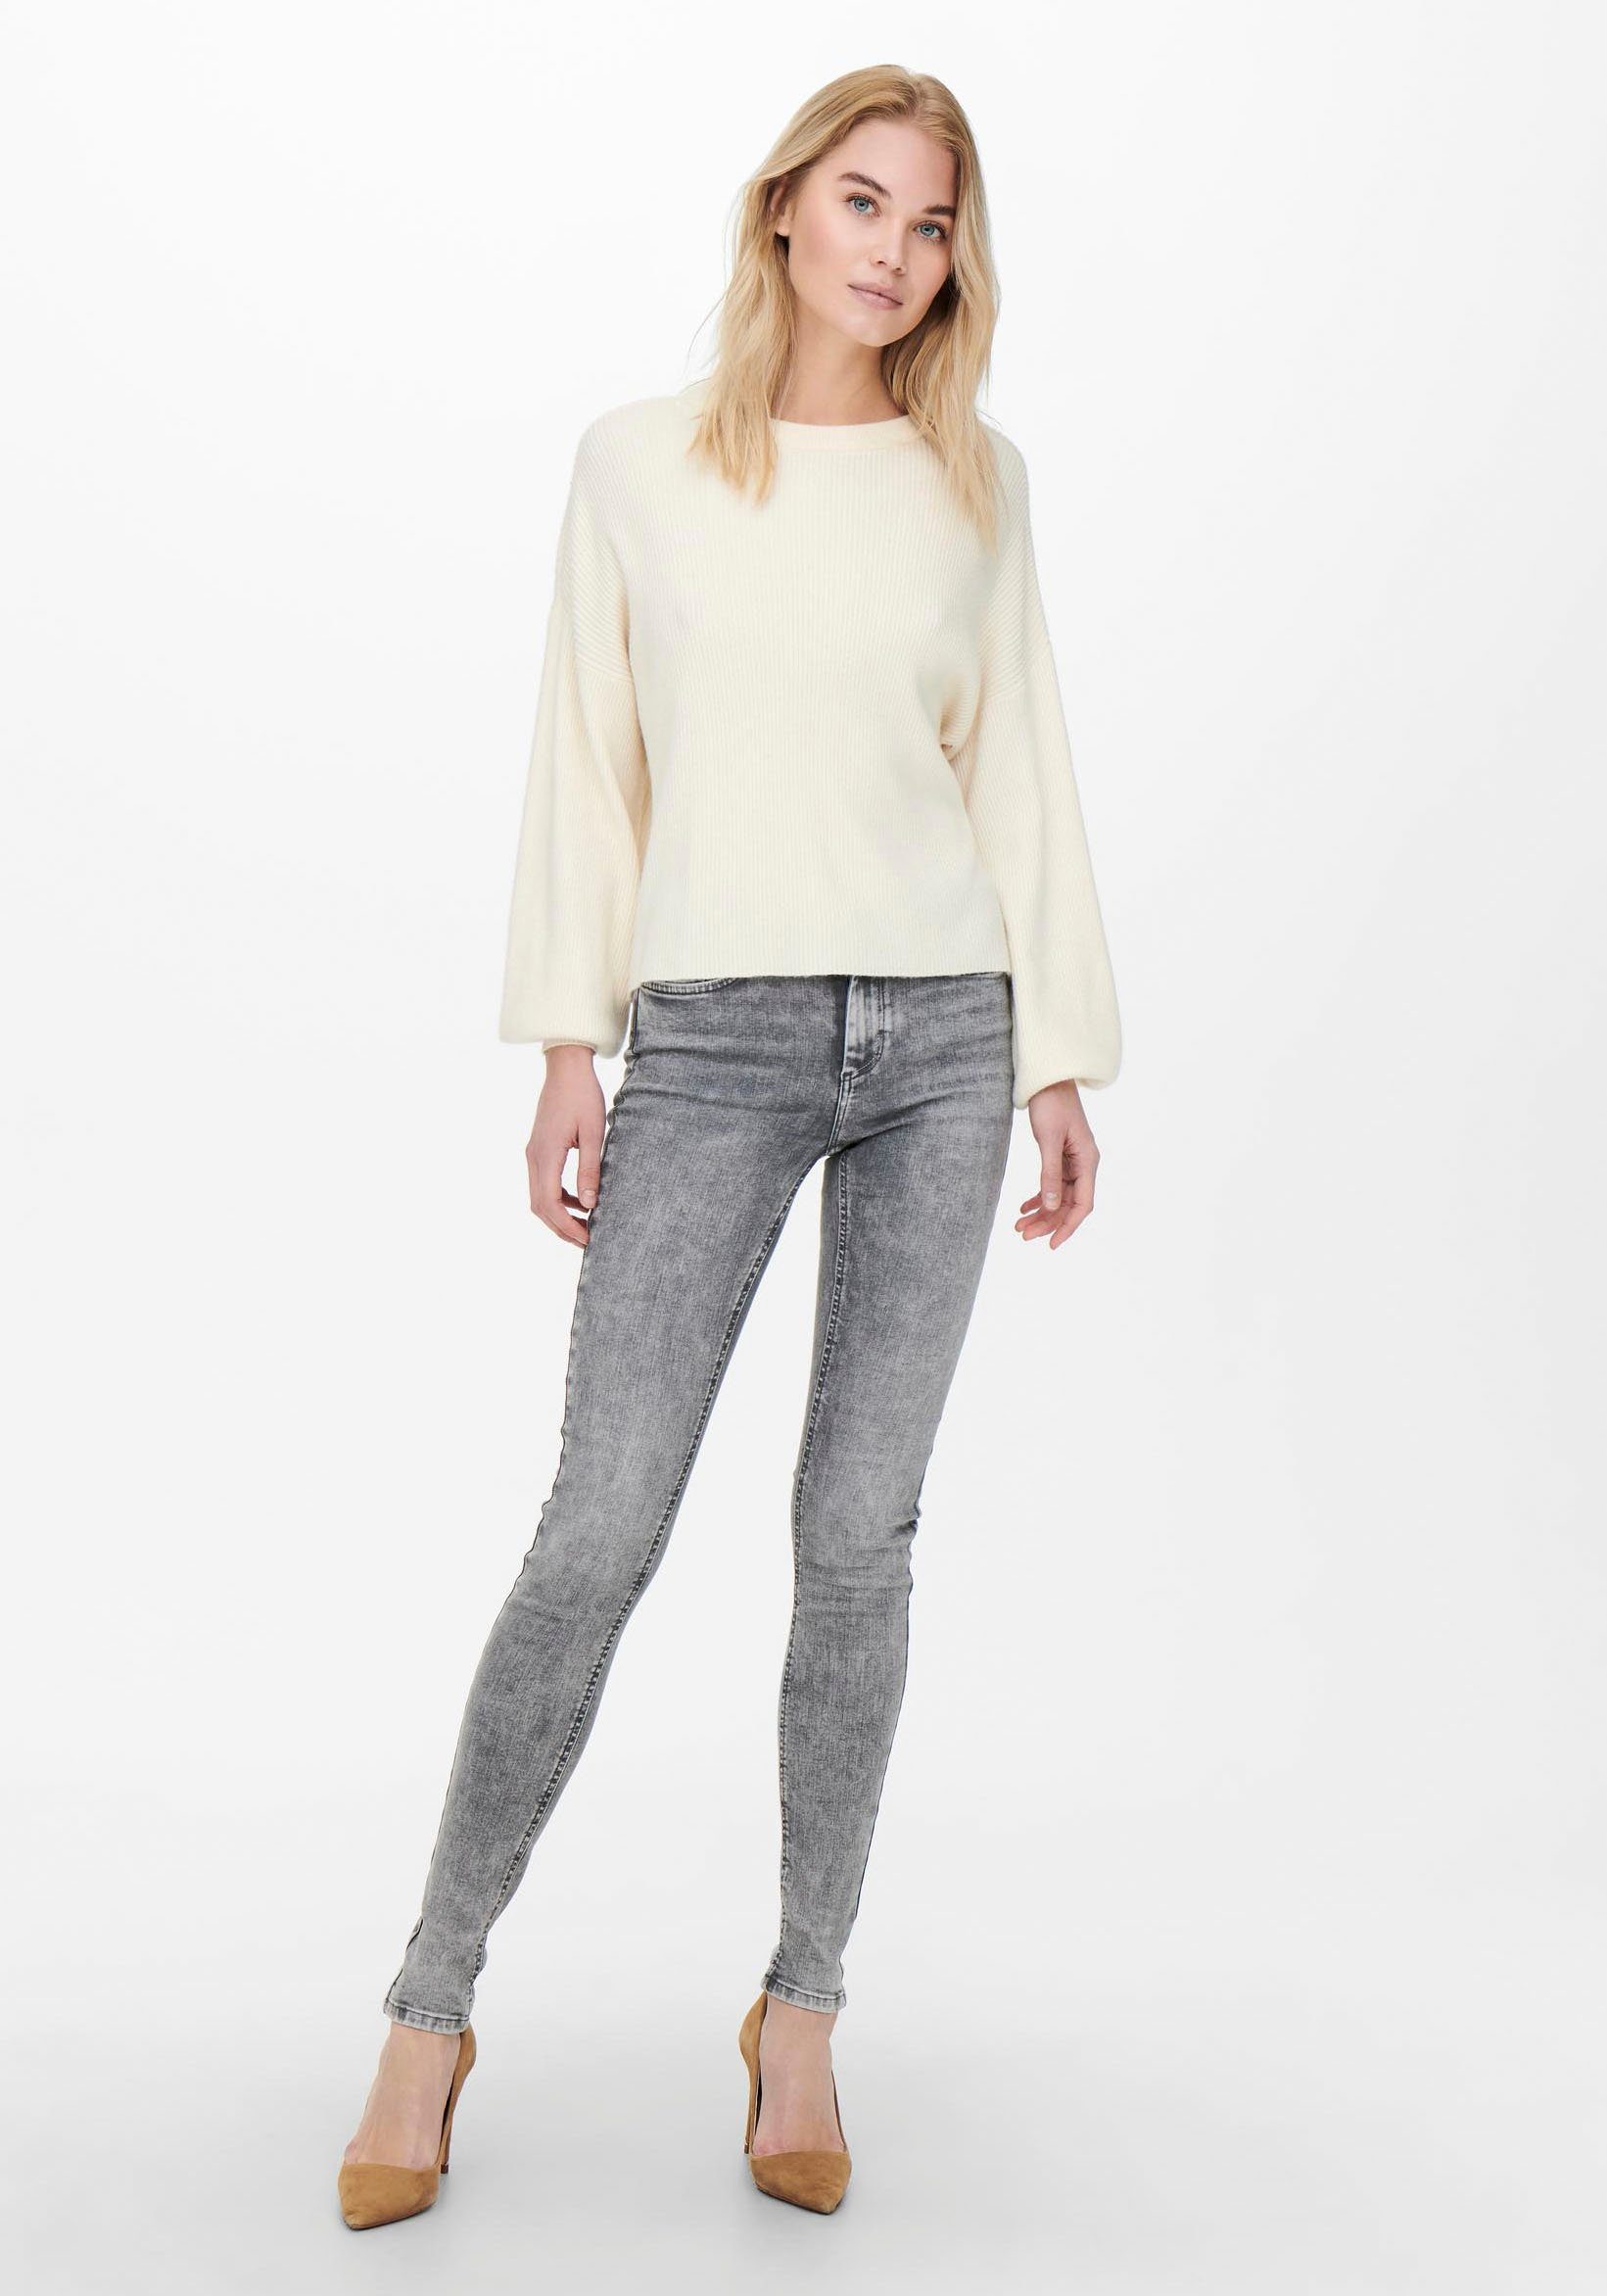 ONLY MID ONLBLUSH SK, ONLY Ankle-Jeans Knackige von Skinny-fit-Jeans LIFE